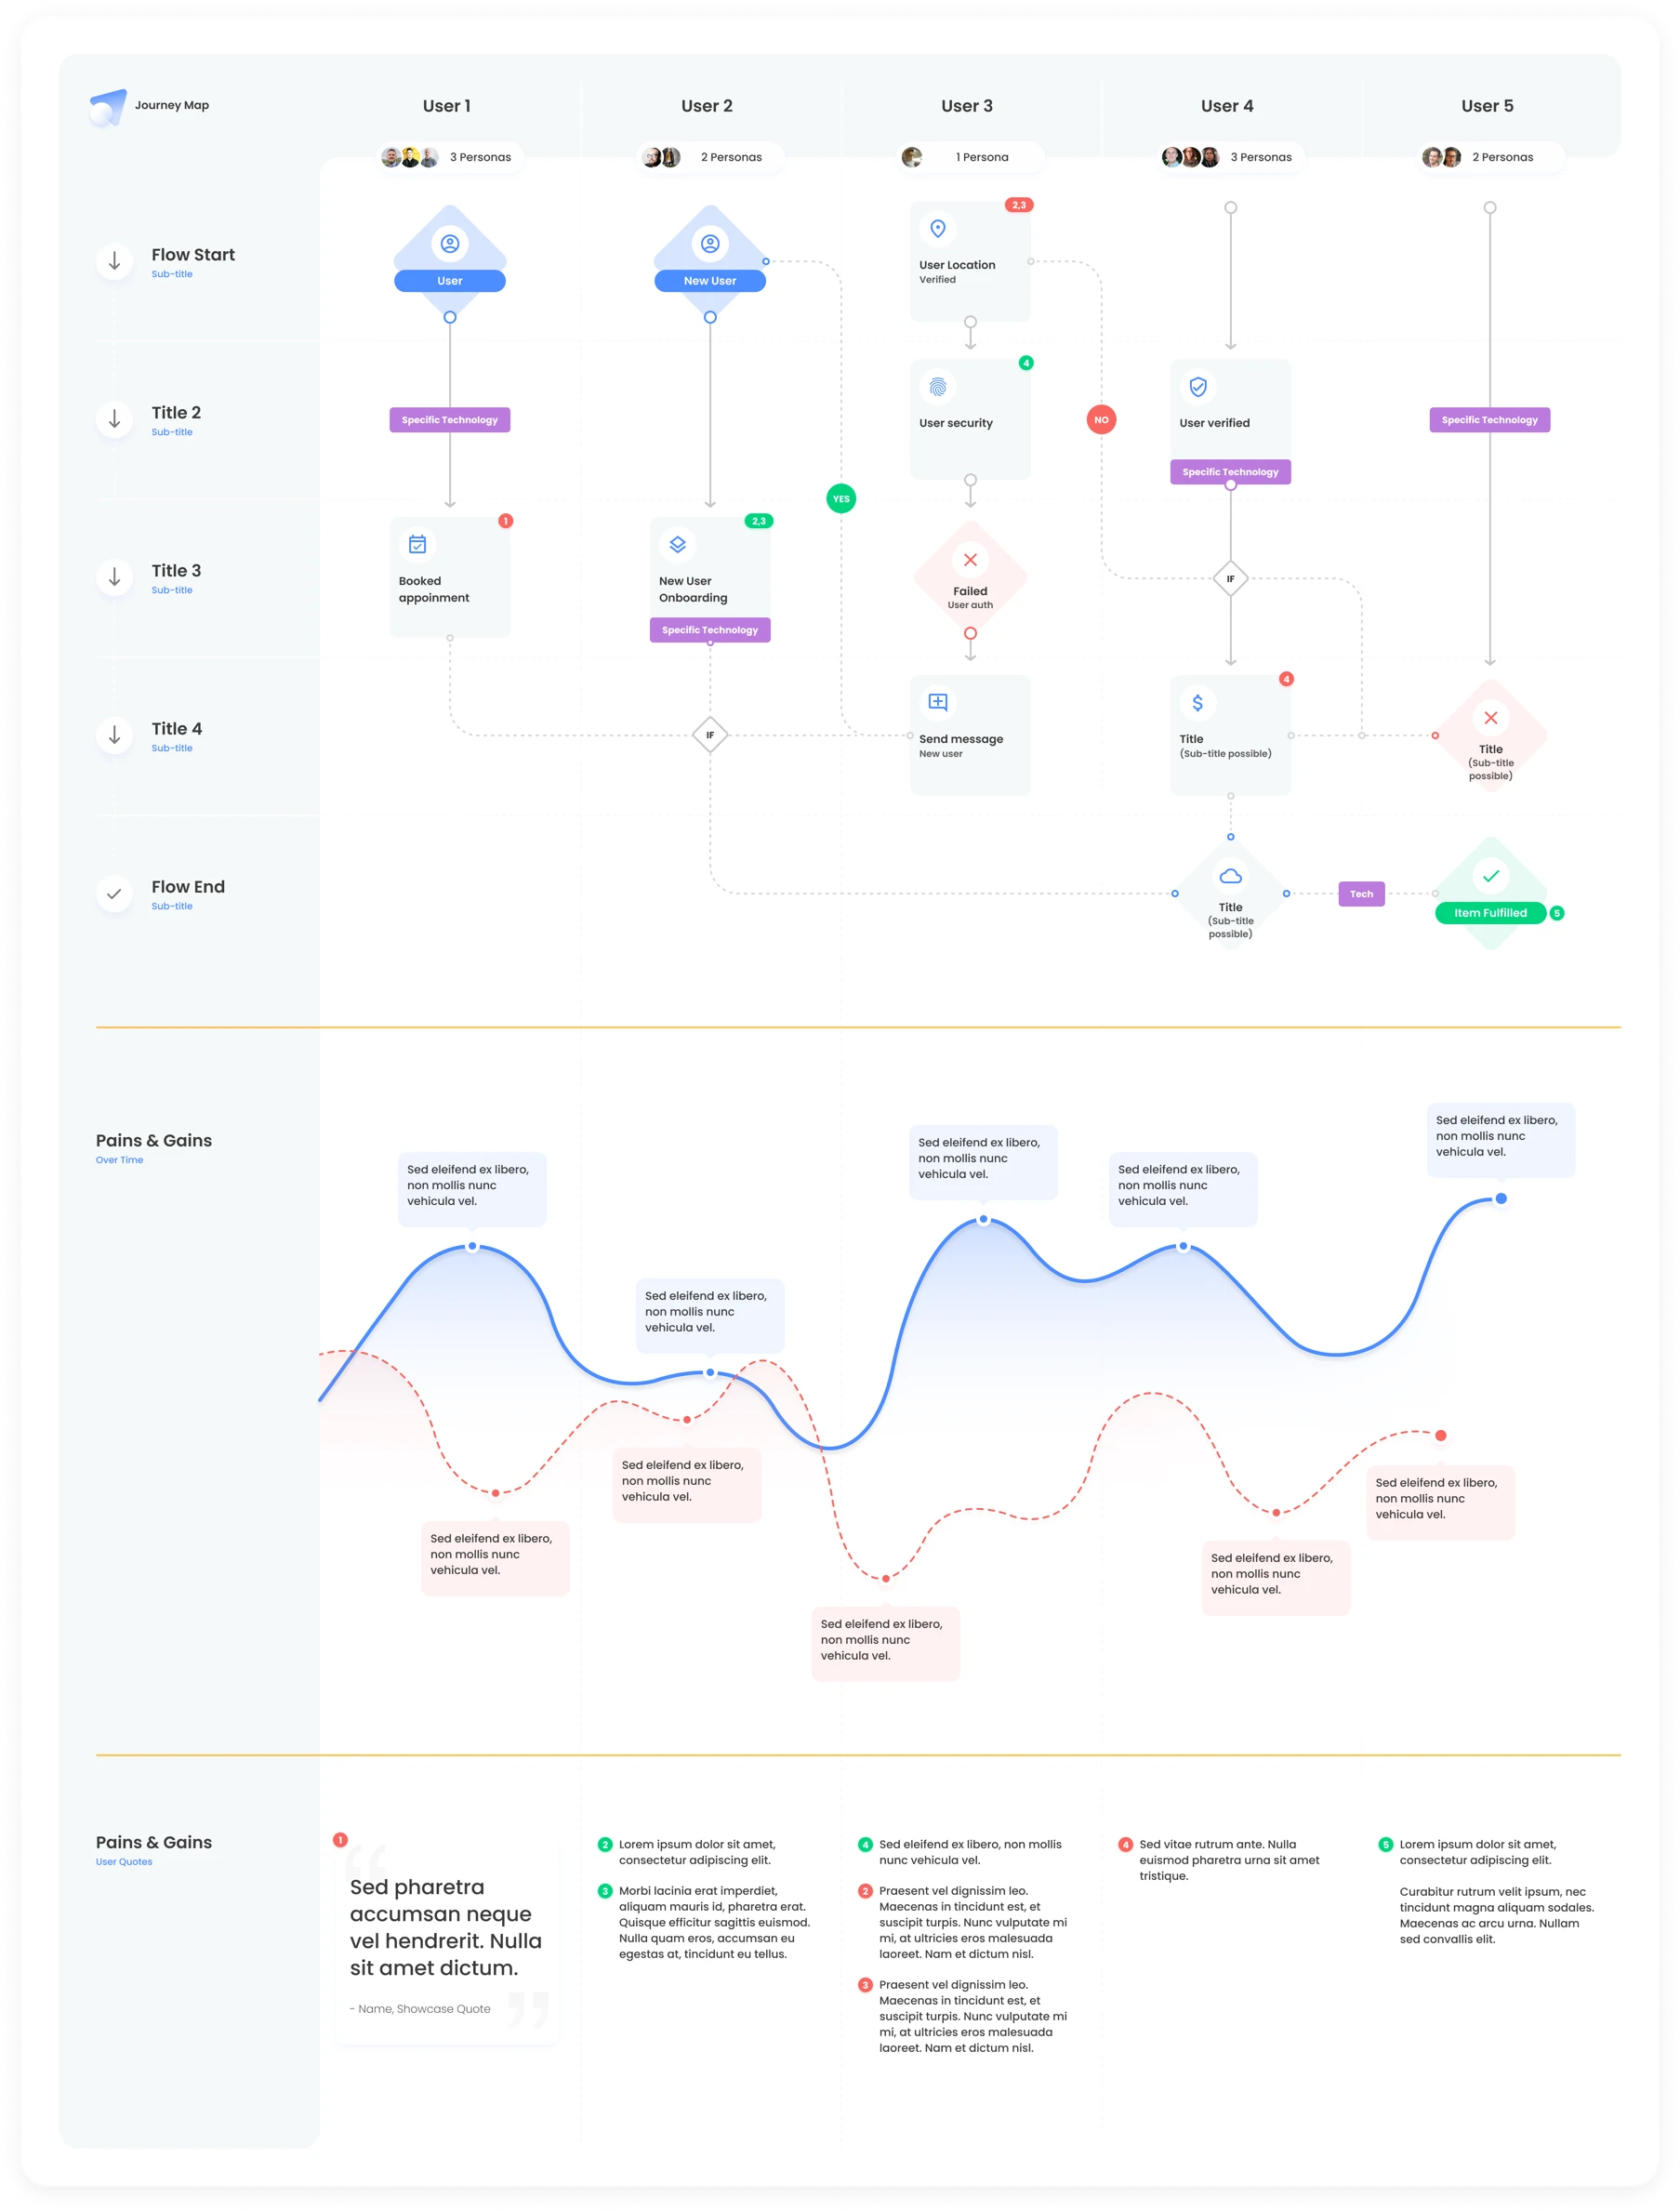 Interactive Journey Map for Figma - Meet the Interactive Journey Map, a new take on journey mapping using Figma's prototyping tools. Expandable mini user personas and clickable user-flow flow elements enable you to go deeper into the details. Duplicate the file and start using it now for free.